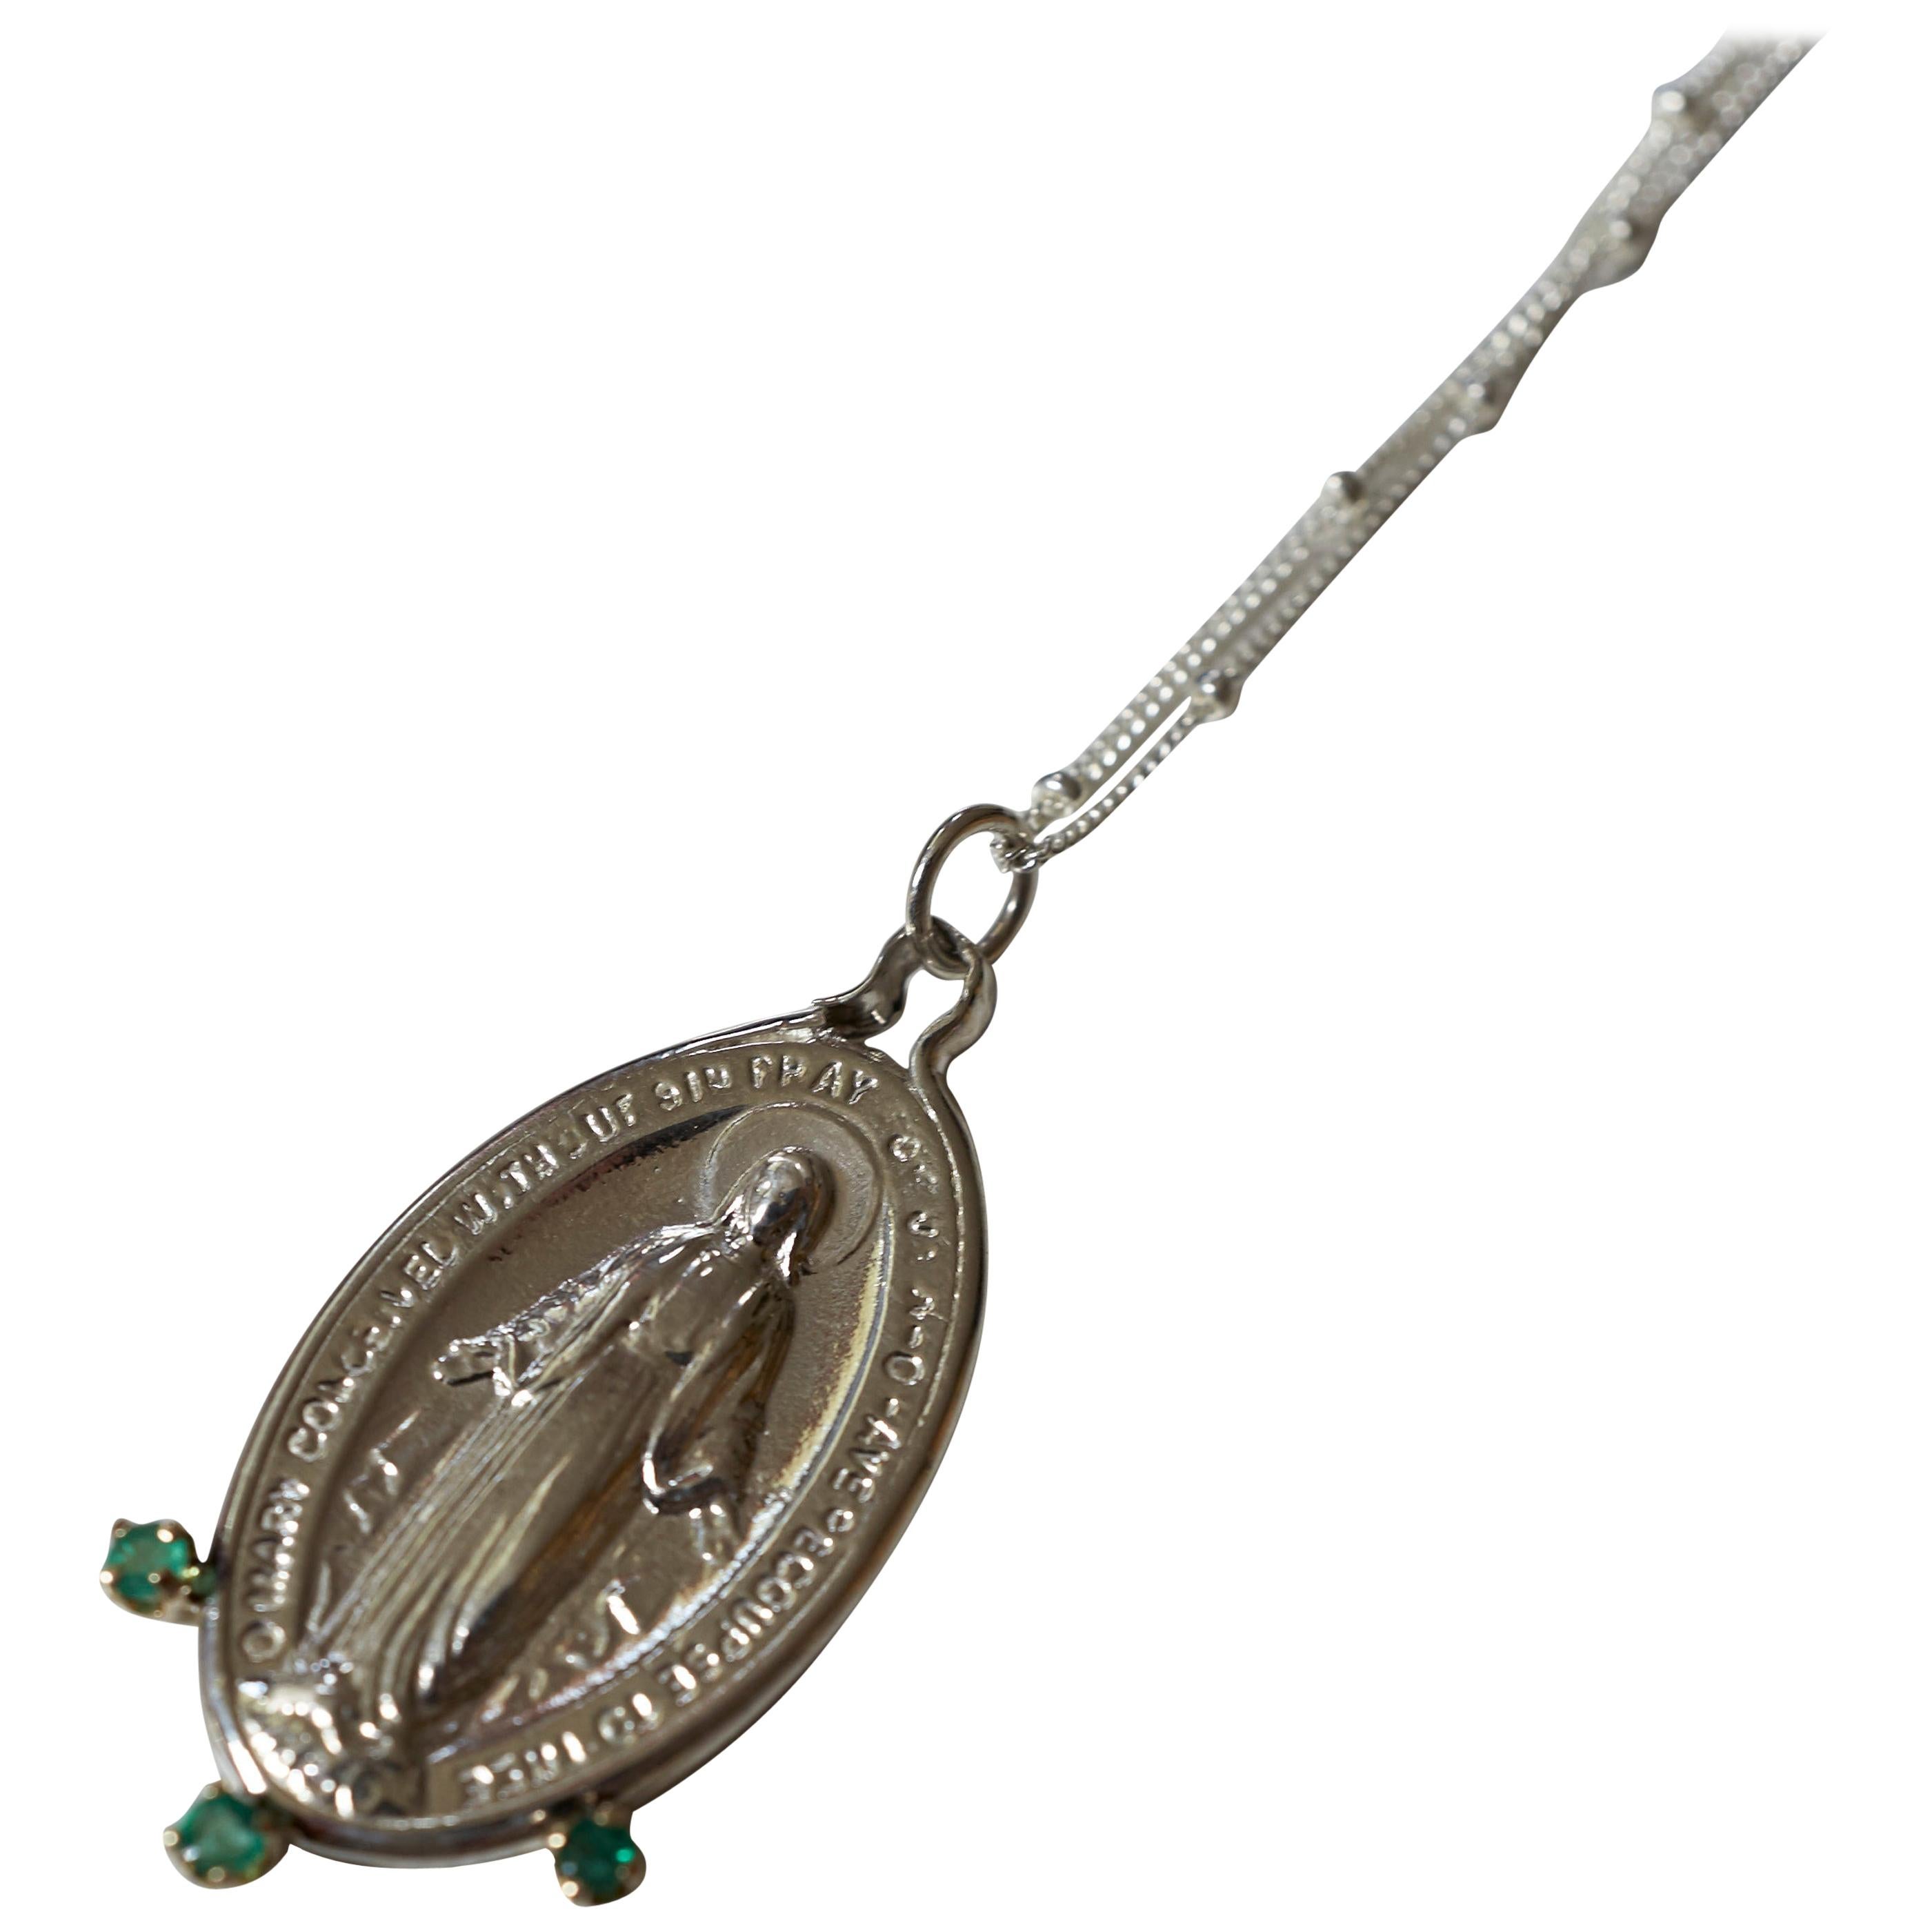 Emerald Virgin French Miraculous Medal Oval Coin Pendant Chain Necklace Silver

Symbols or medals can become a powerful tool in our arsenal for the spiritual. 
Since ancient times spiritual pendants, religious medals has been used to protect us.